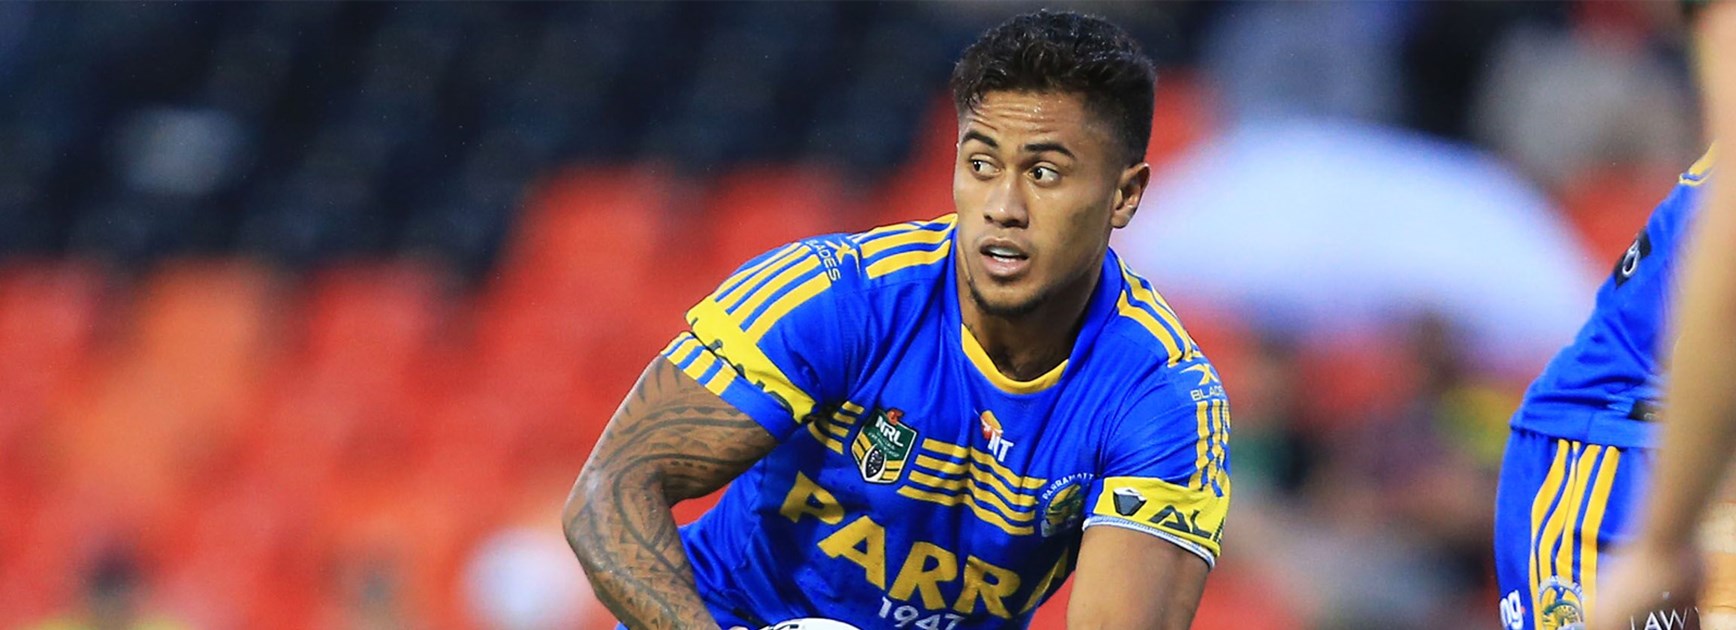 Kaysa Pritchard started at hooker for Parramatta in their final trial match.